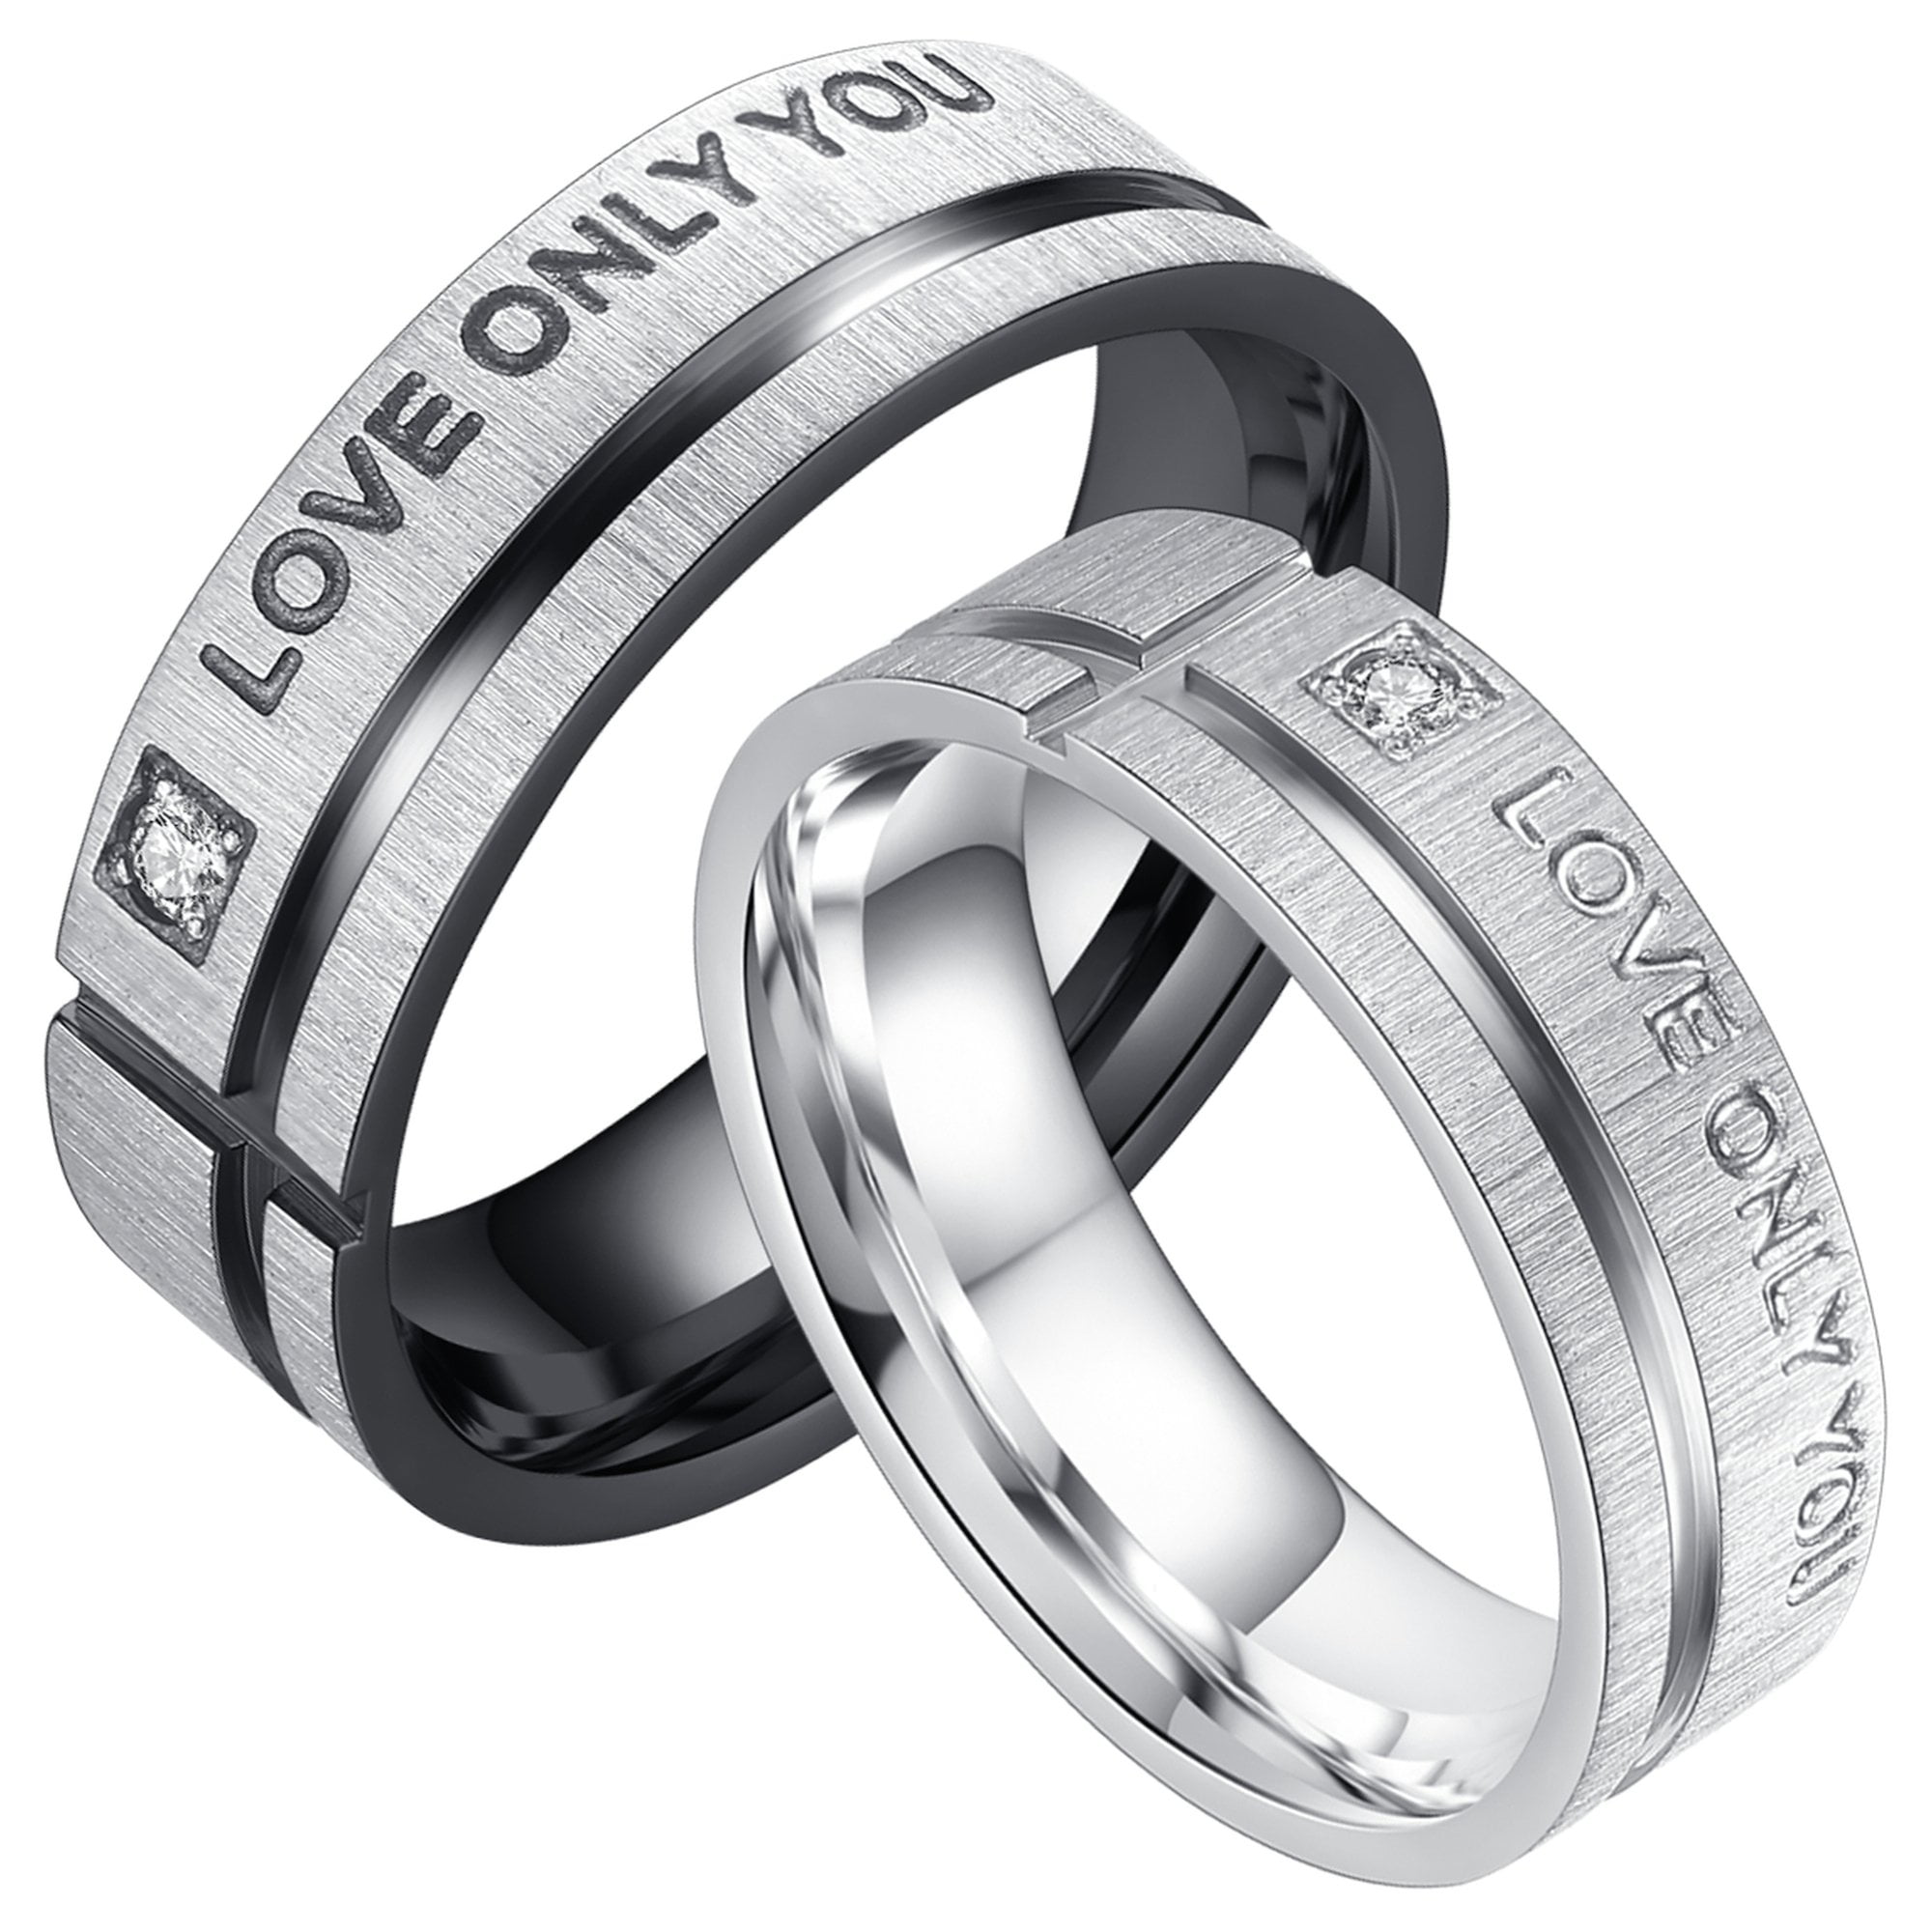 Arco Iris Jewelry - Couple's Promise Ring "Love Only You ...